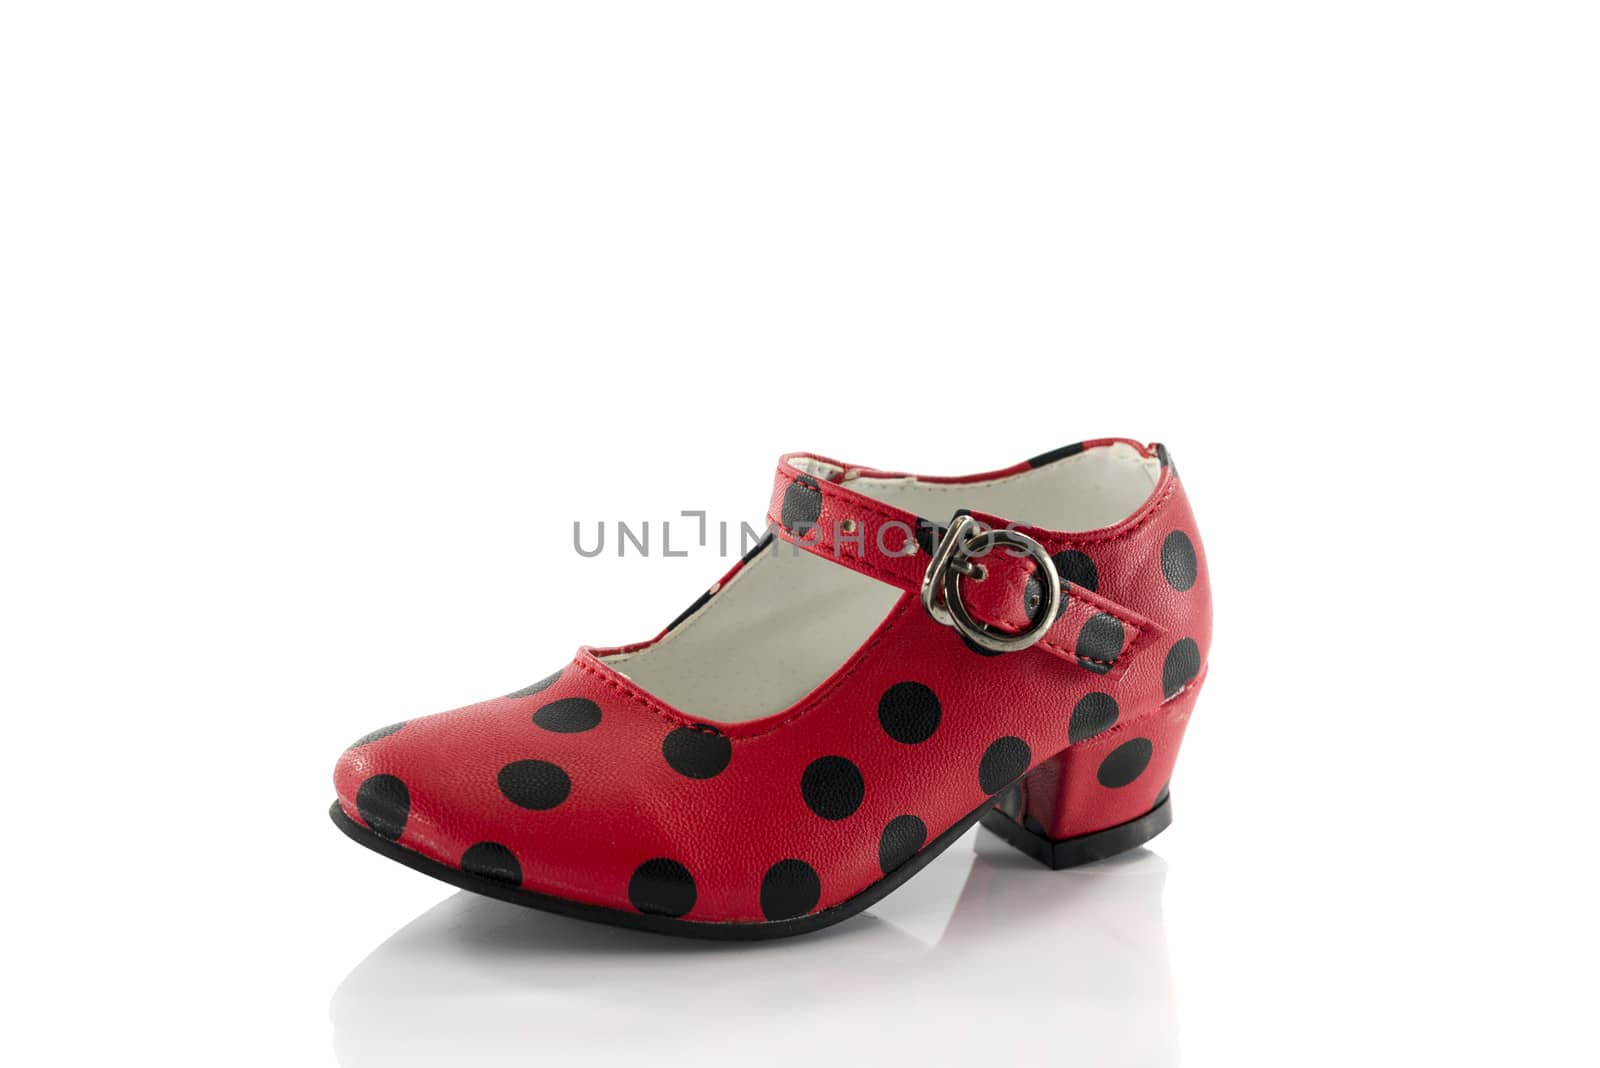 red and black spanish shoes by compuinfoto